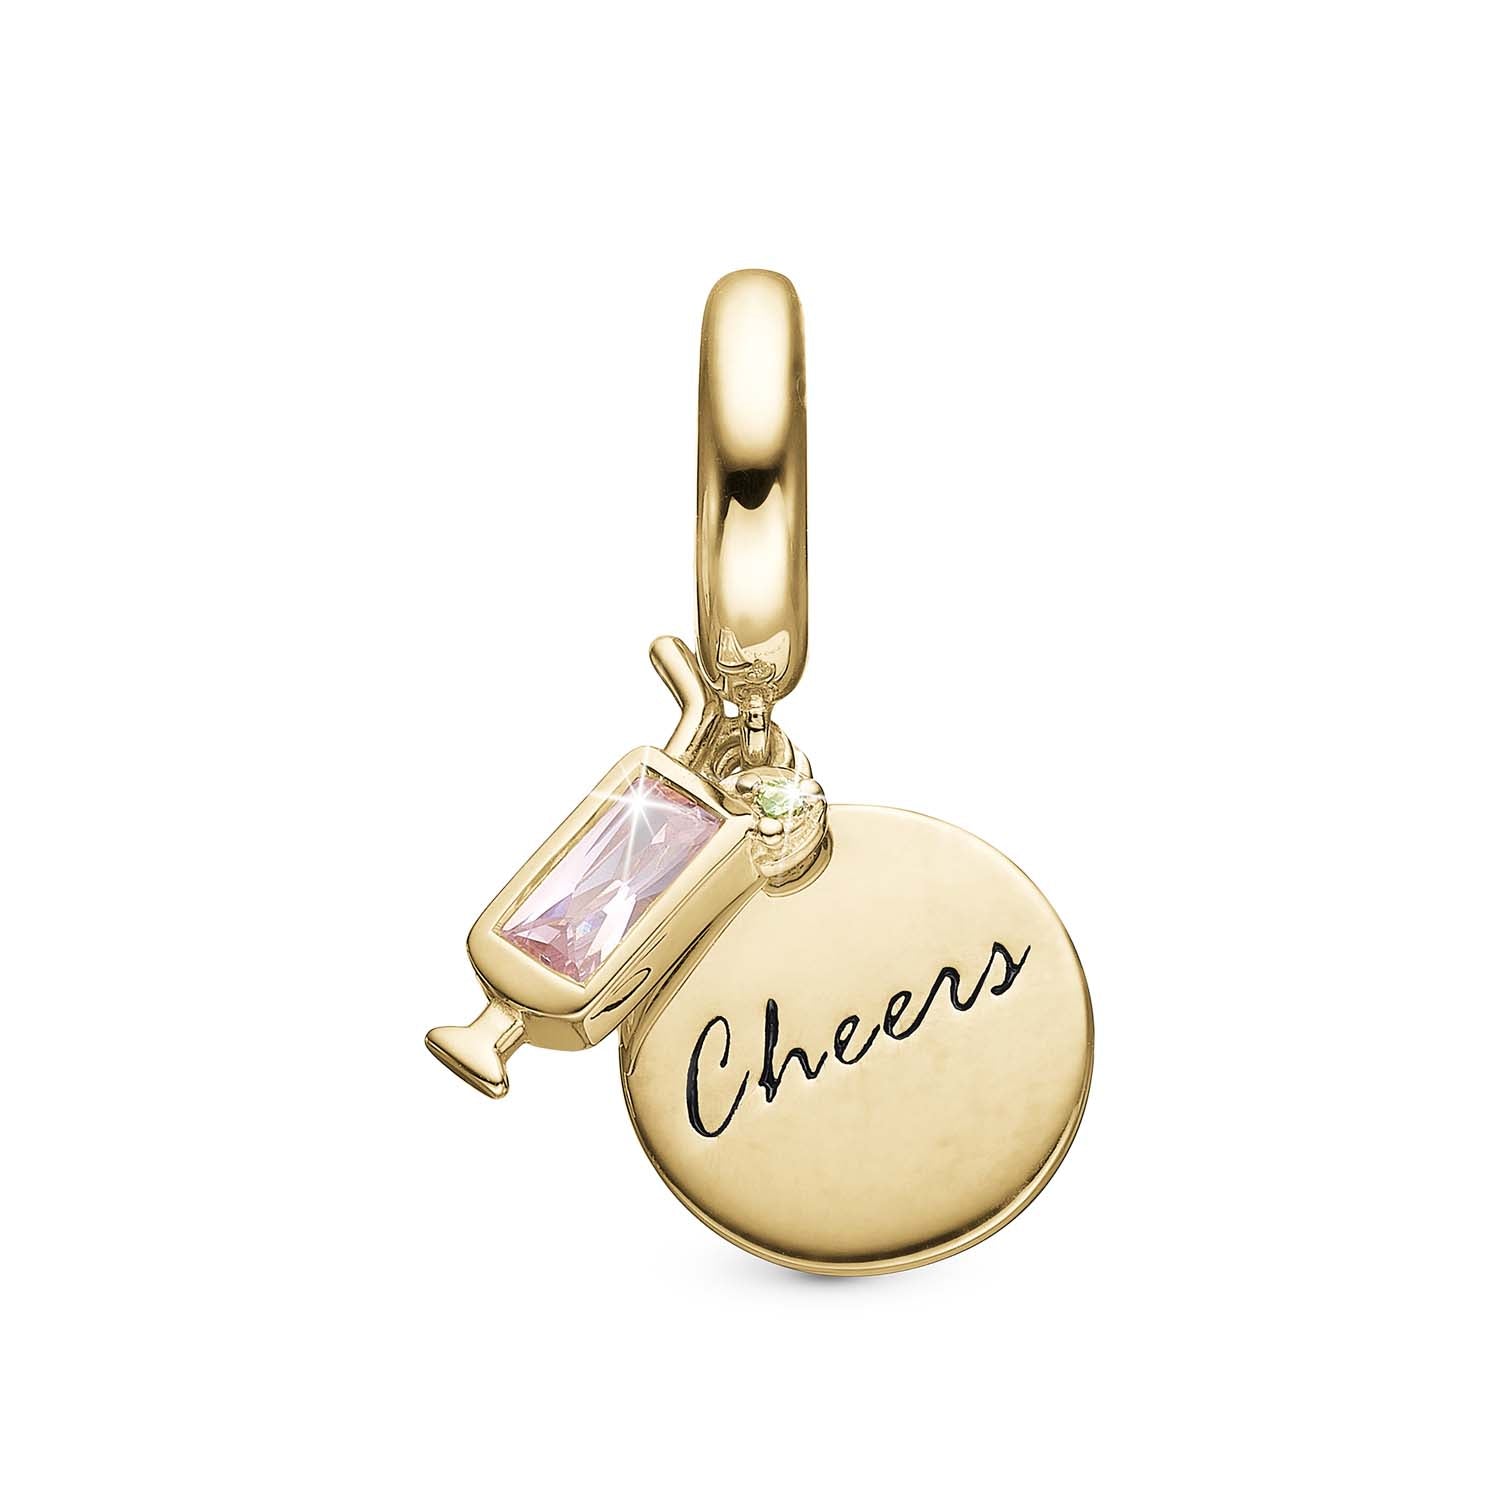 Se Christina Design London Jewelry & Watches - Cheers Charm forgyldt 6 mm. hos Vibholm.dk